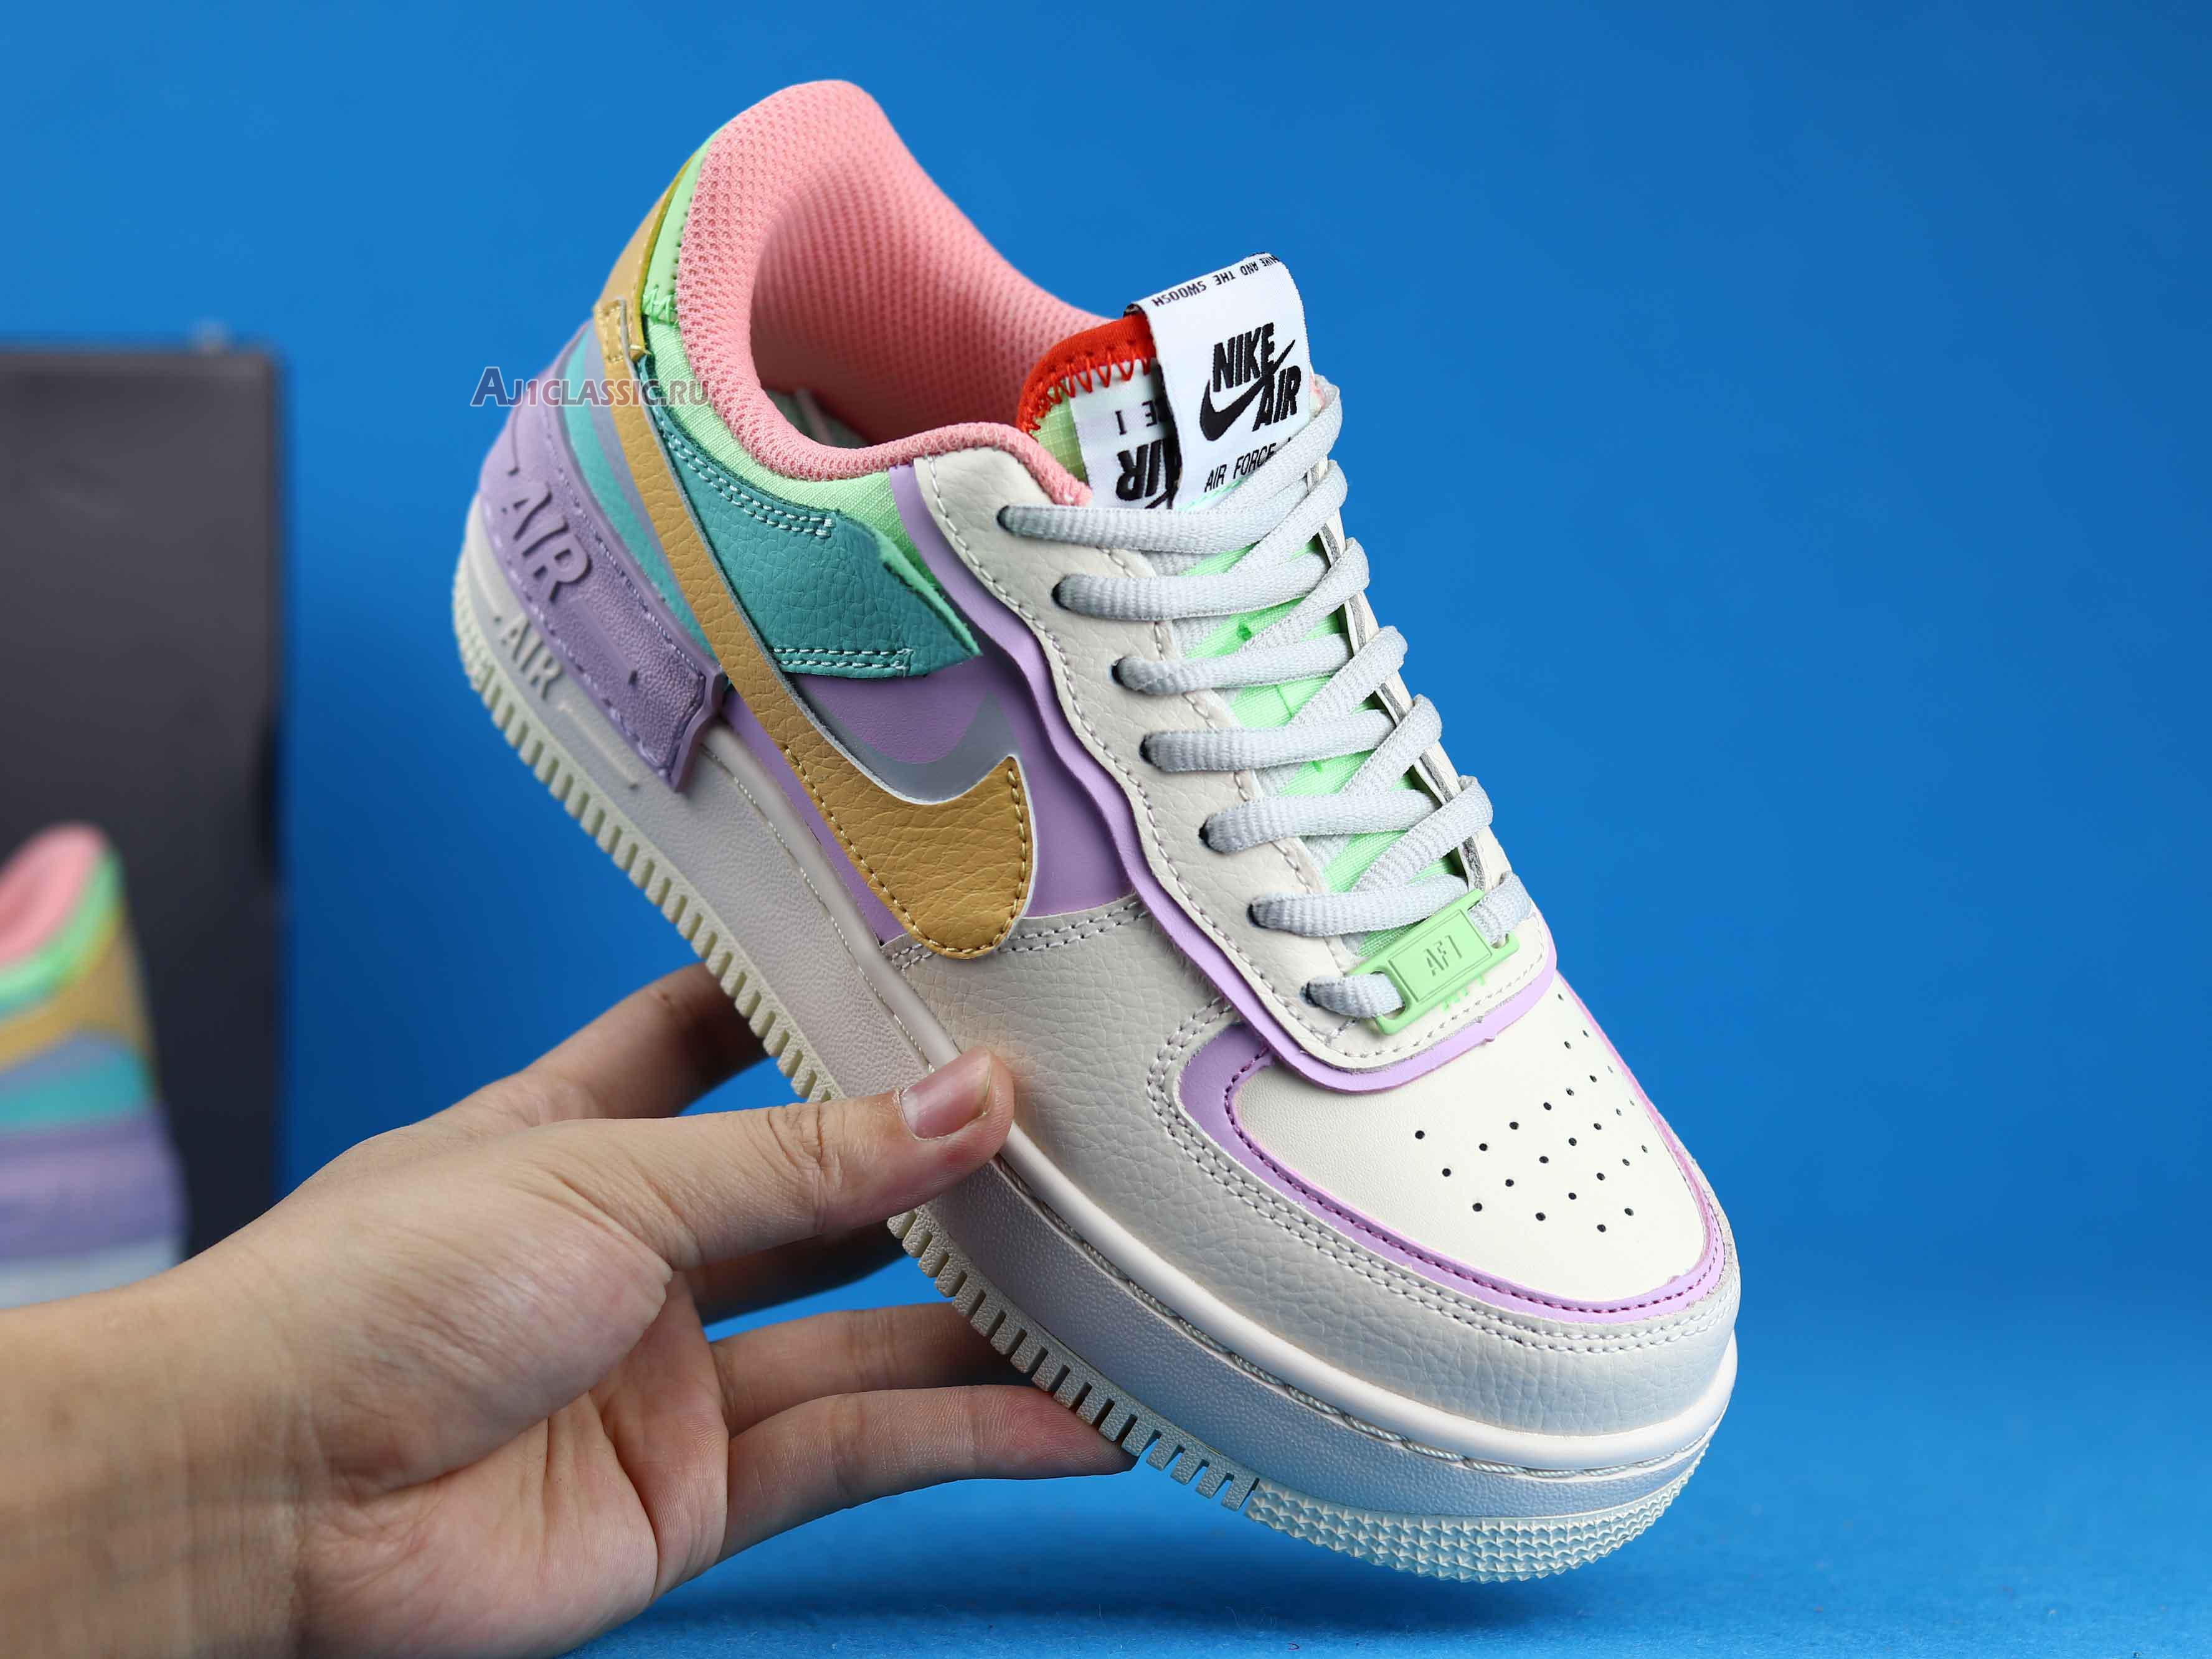 Nike Wmns Air Force 1 Low Shadow "Pale Ivory" CI0919-101